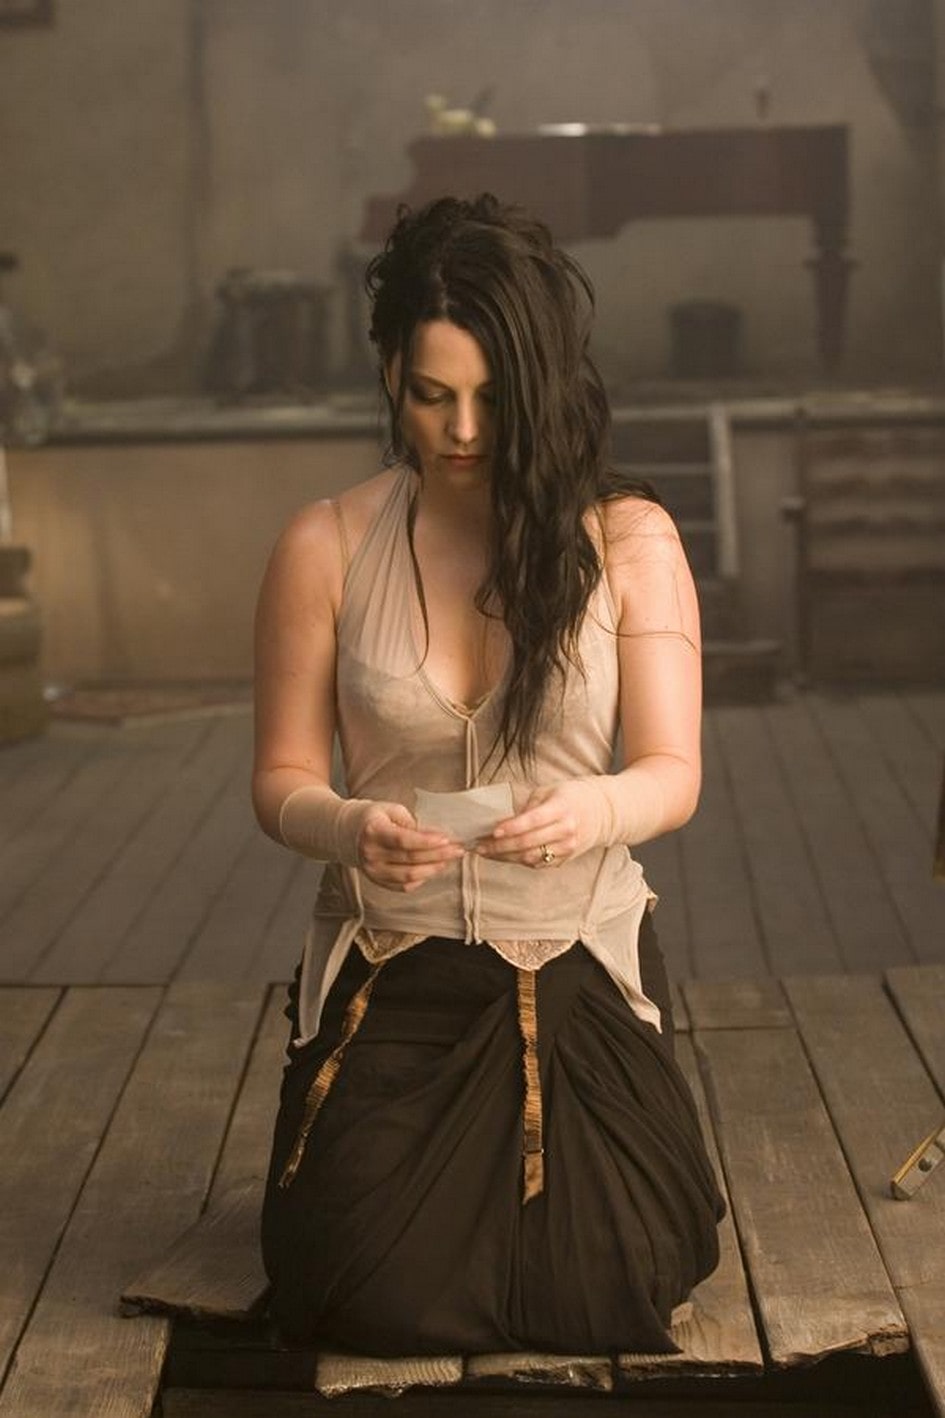 Amy Lee on Evanescence